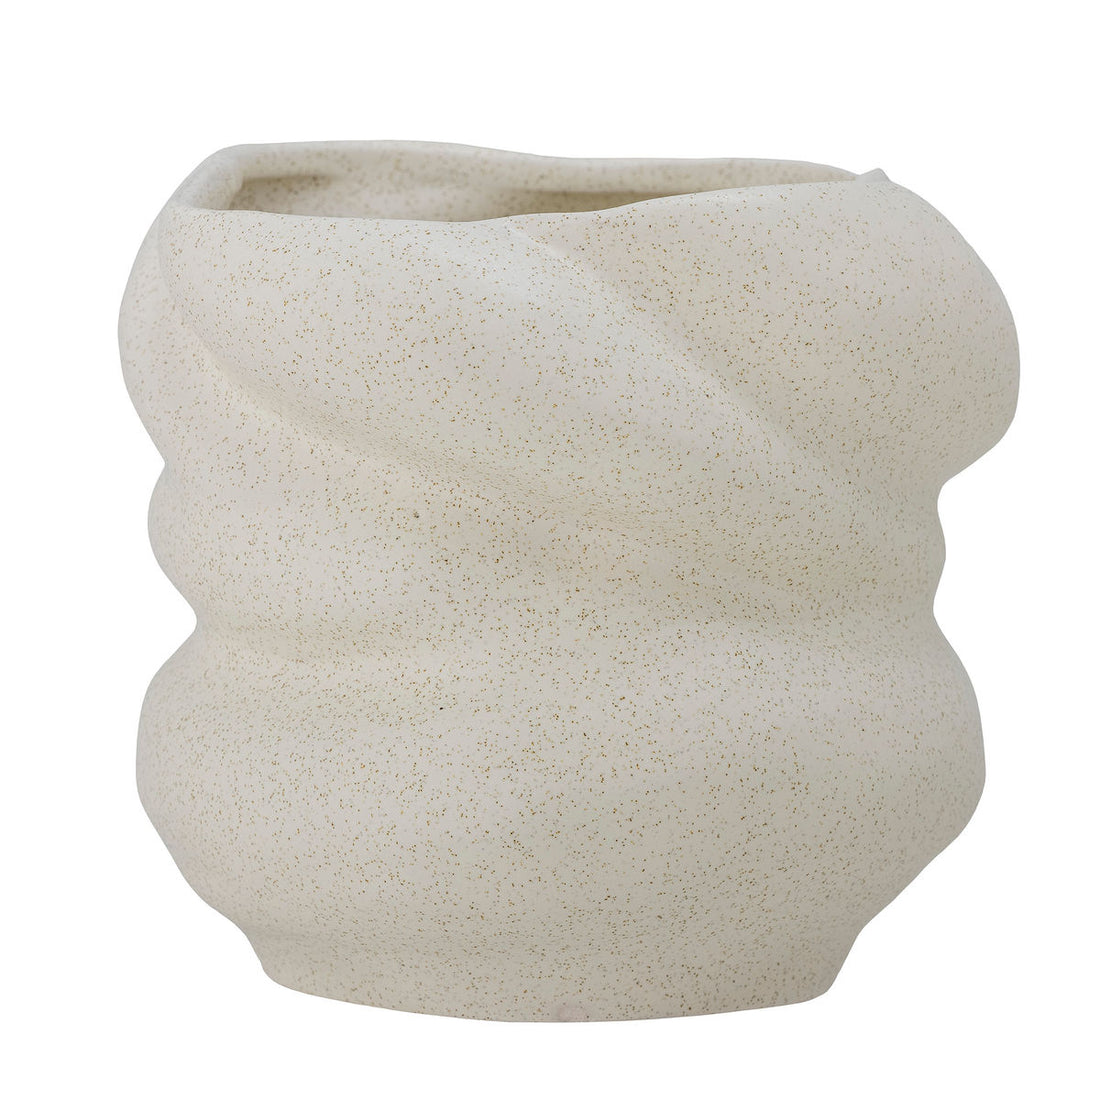 Bloomingville Orana Herbal Potted Hides, White, Stoneware